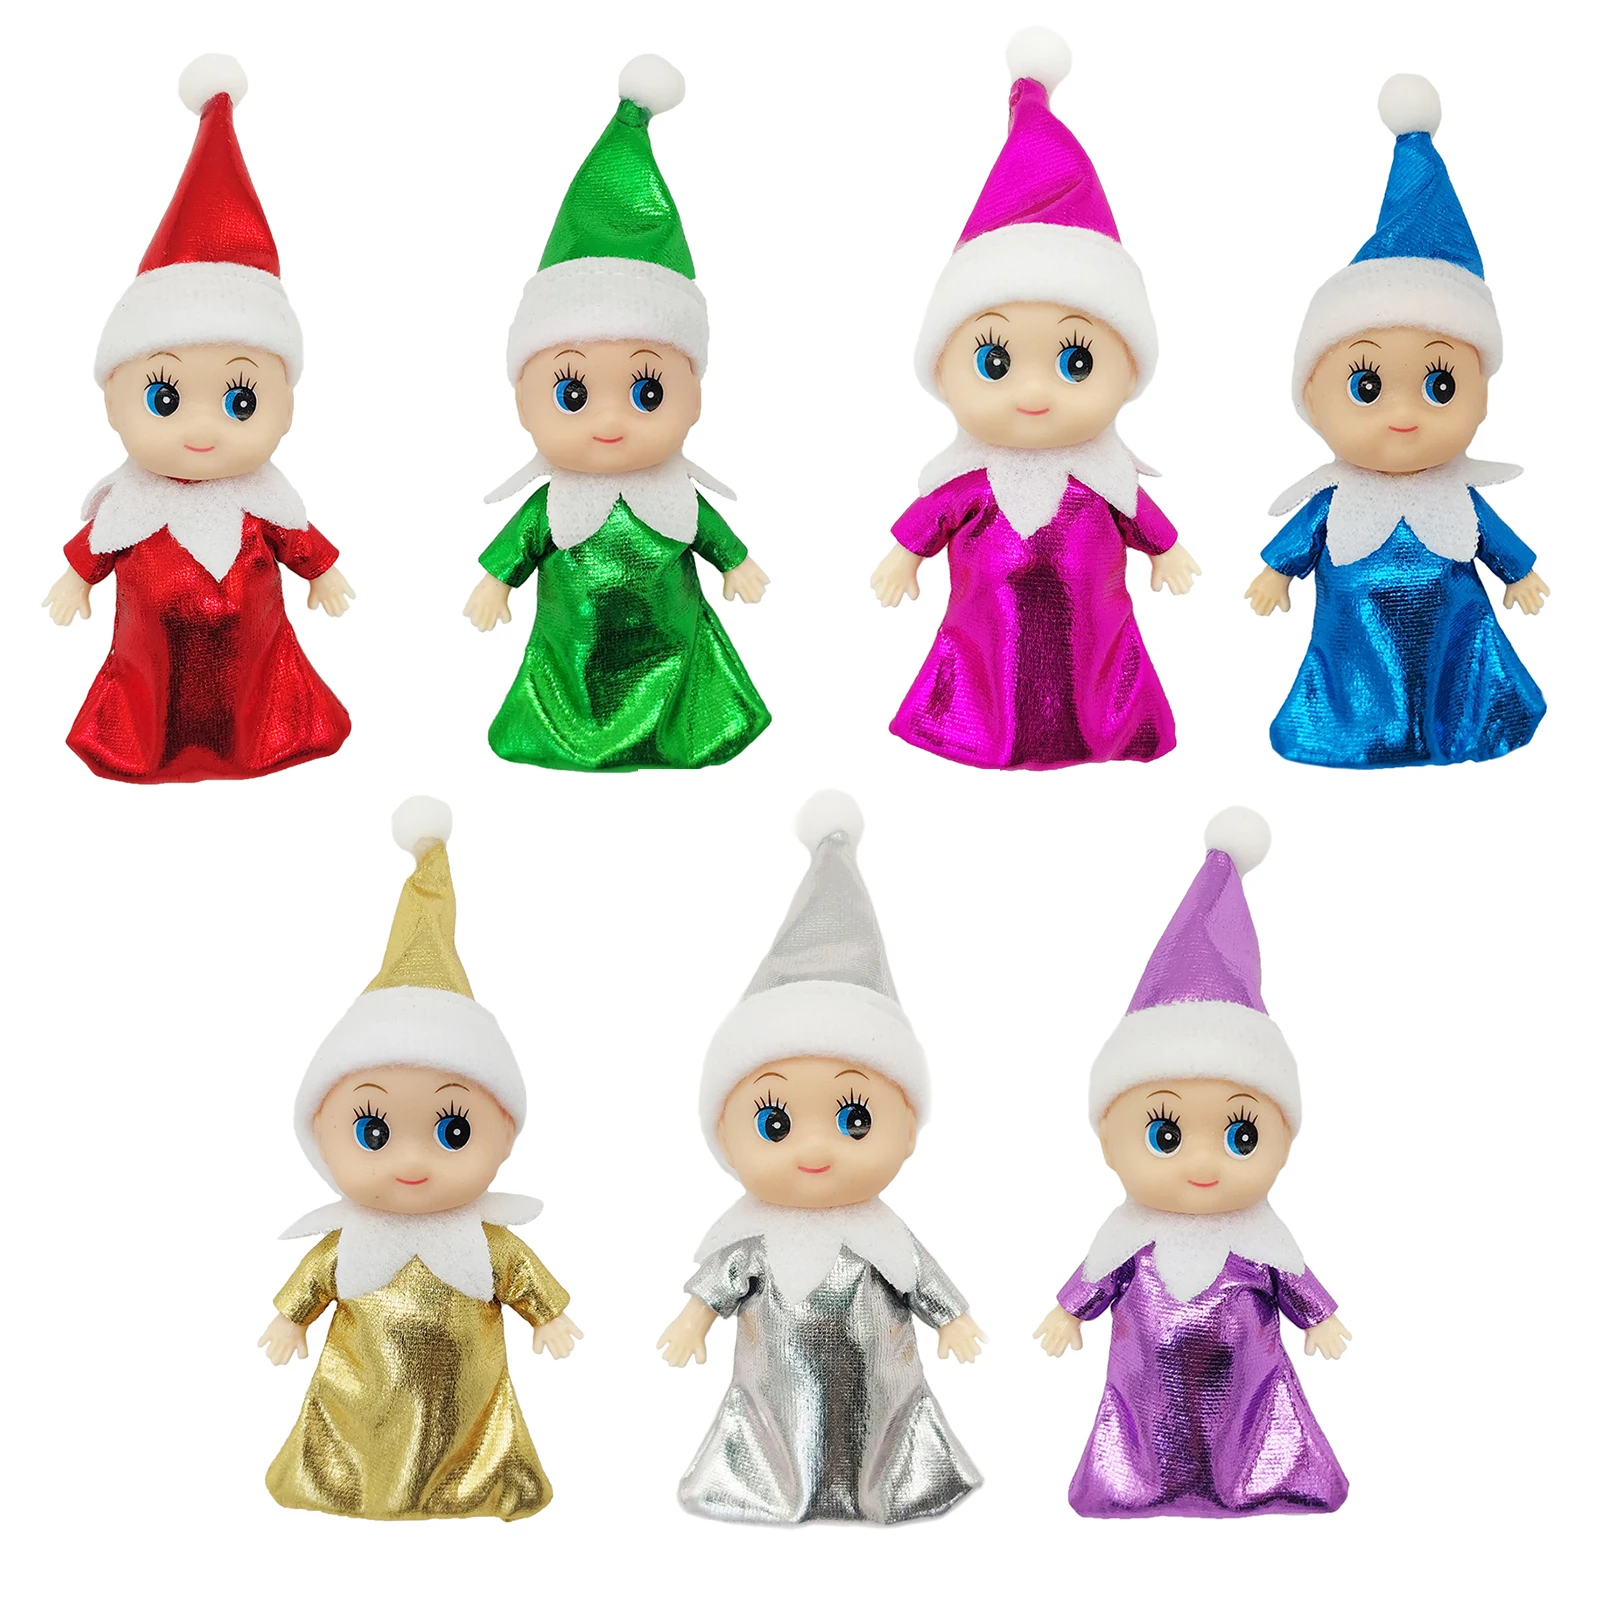 Mini Baby Elf Dolls Todder Shining Kindness Sleeping Bag Craft Babies Doll Toy Decoration On The Shelf Gift for Girl Boy Kid high quality metal plants stand holder bedroom mini window plant shelf room standing mensole per piante balcony furniture